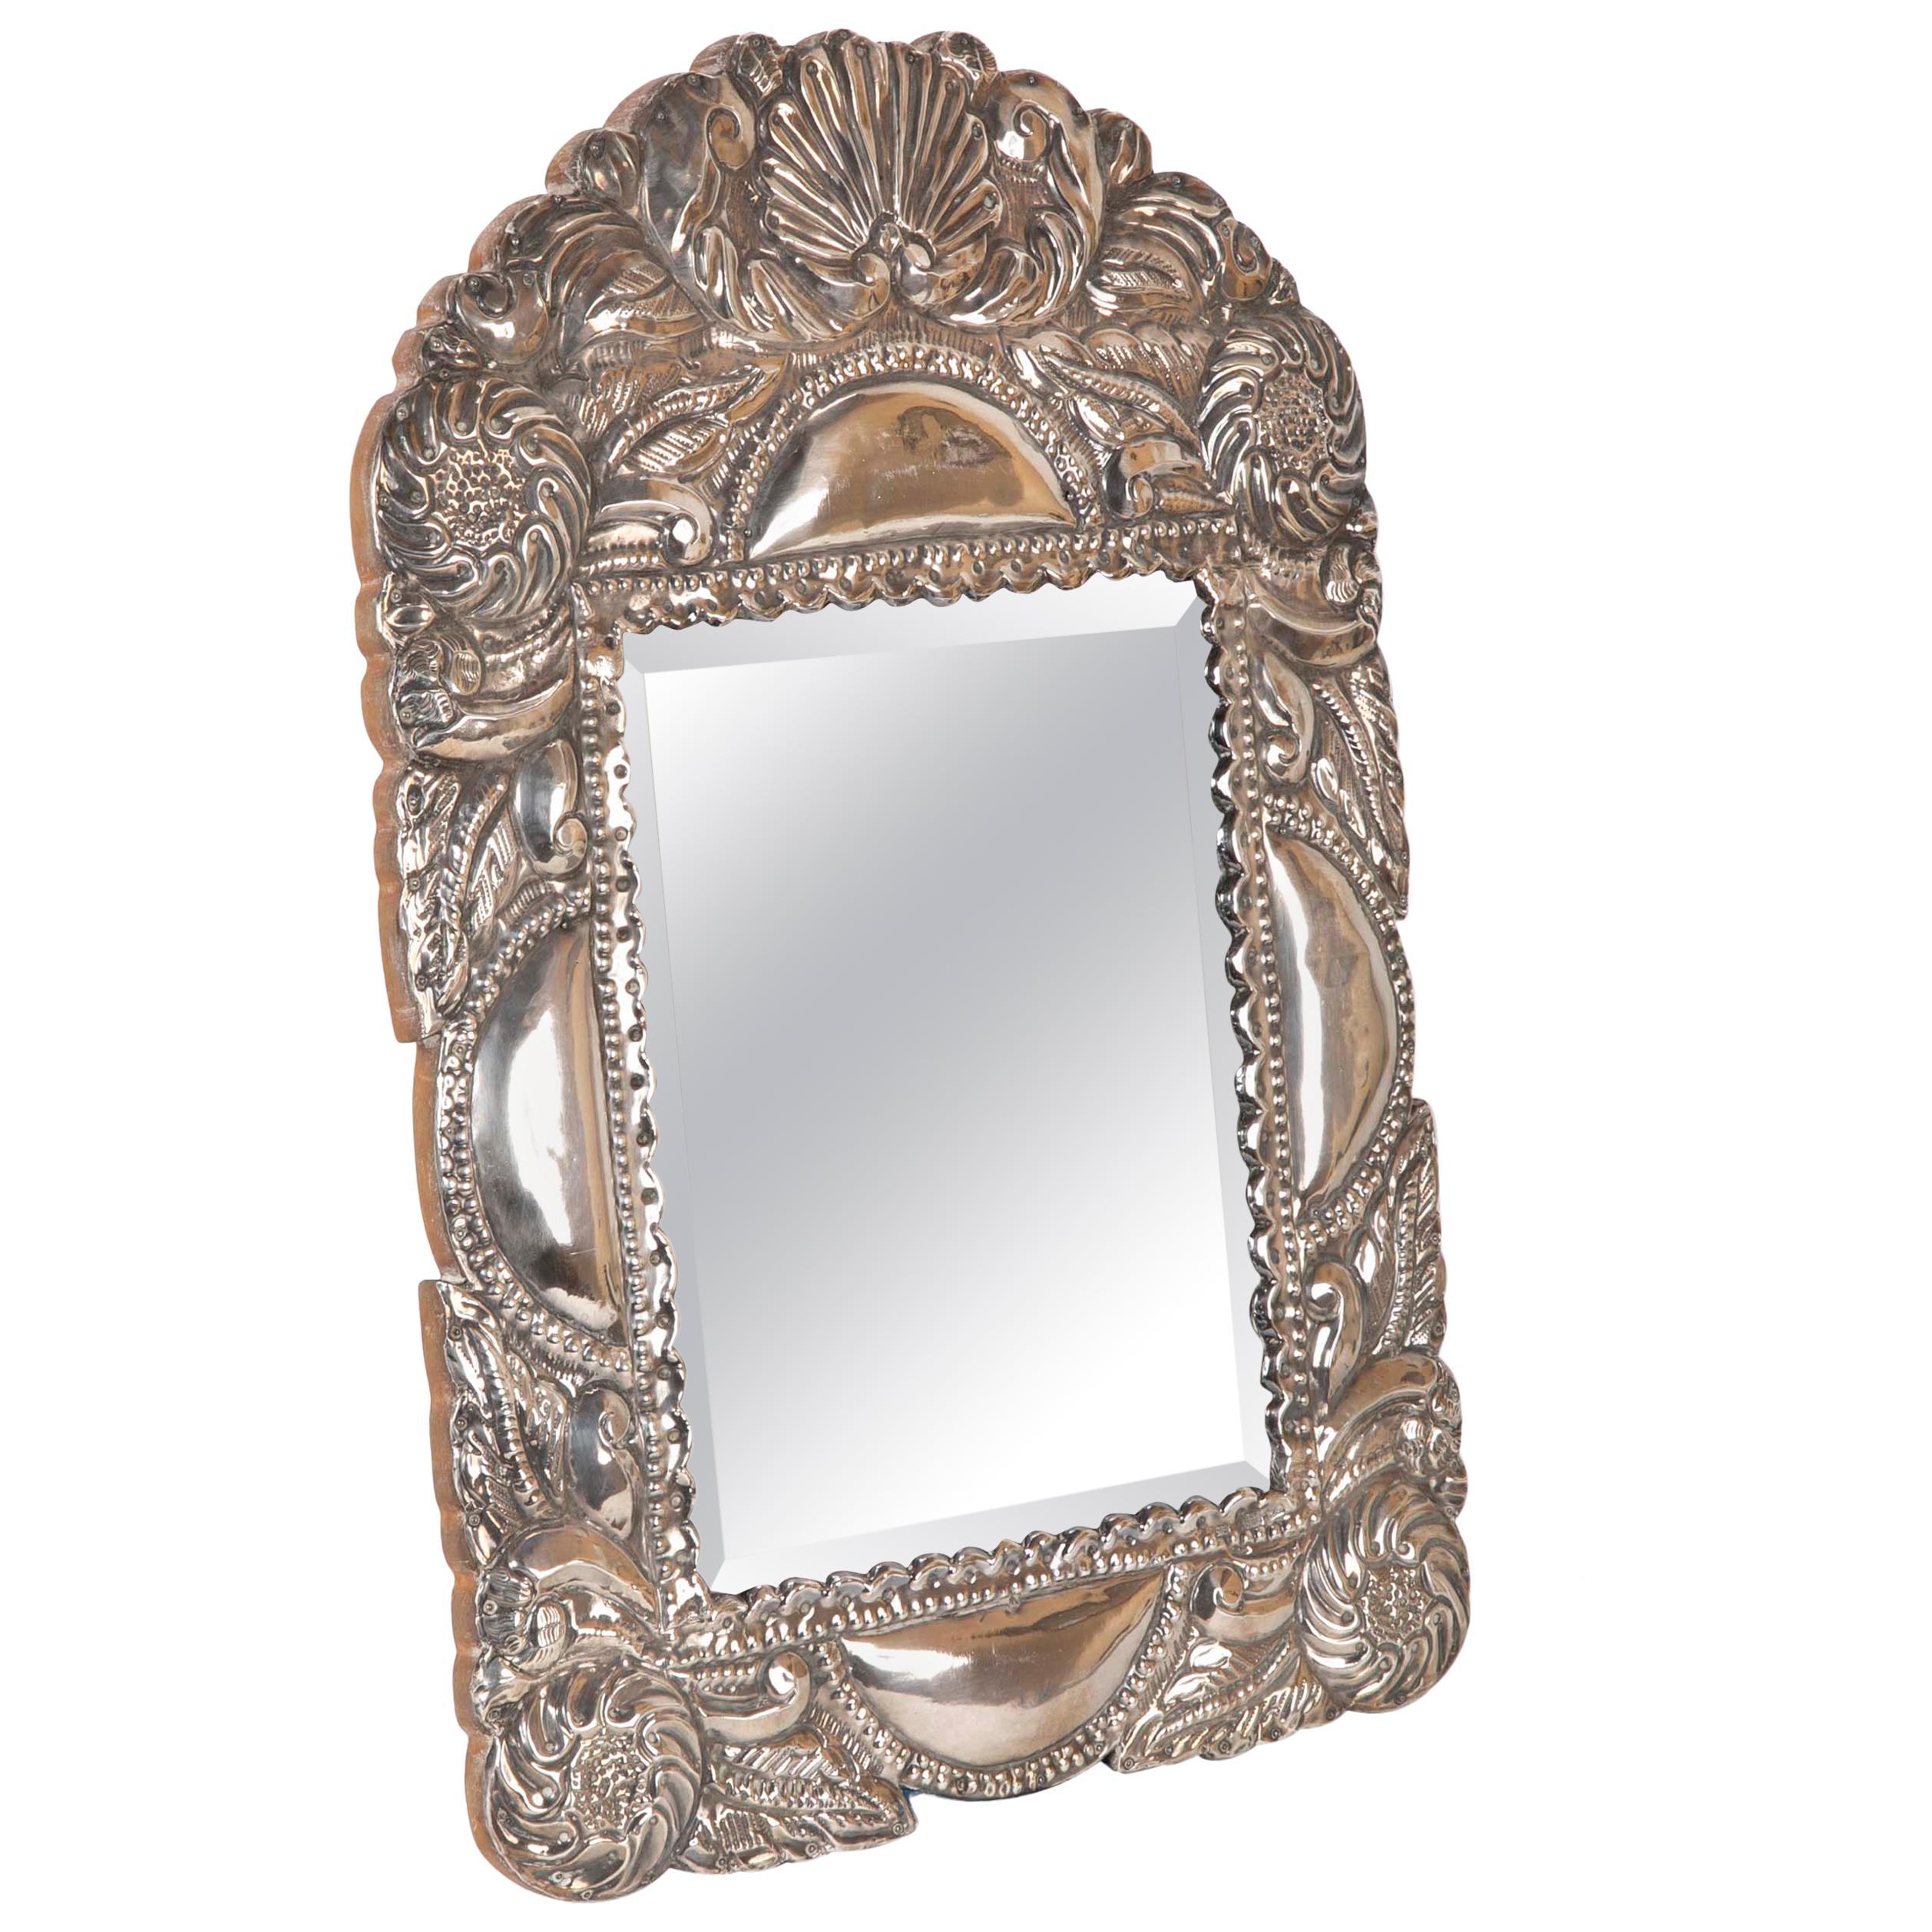 Spanish Colonial Sterling Silver Mirror Frame